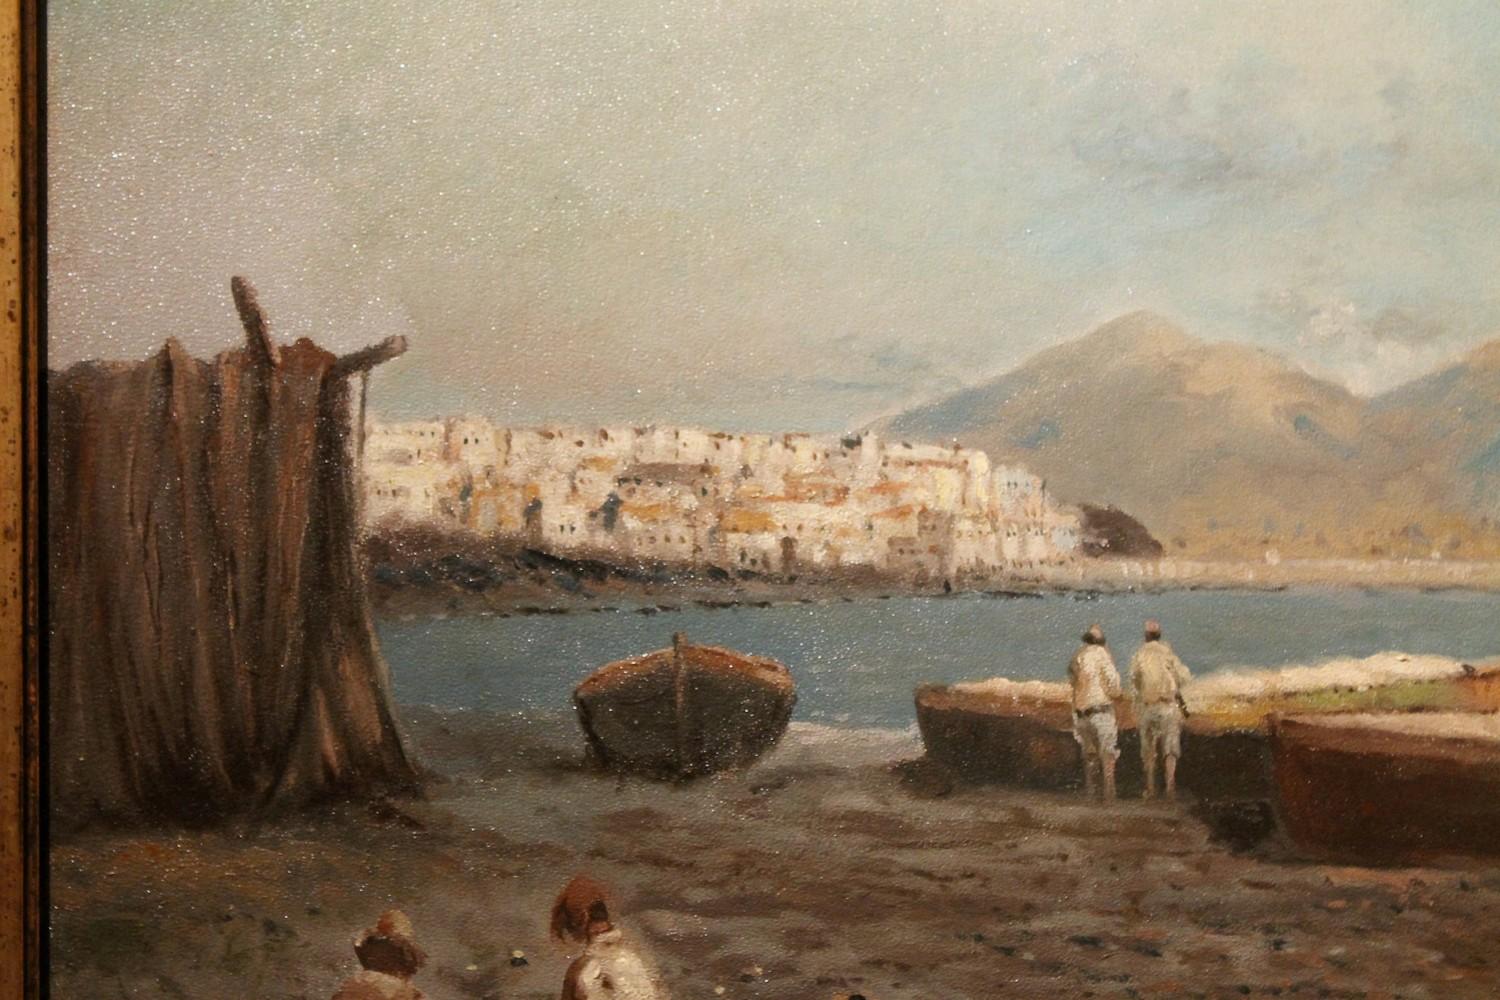 Everyday fishermen life is captured in this wonderful Italian impressionist late 19th century oil painting on thin board titled fishermen ashore. We love the neutral and natural color palette the painter used to photograph a moment of daily life in